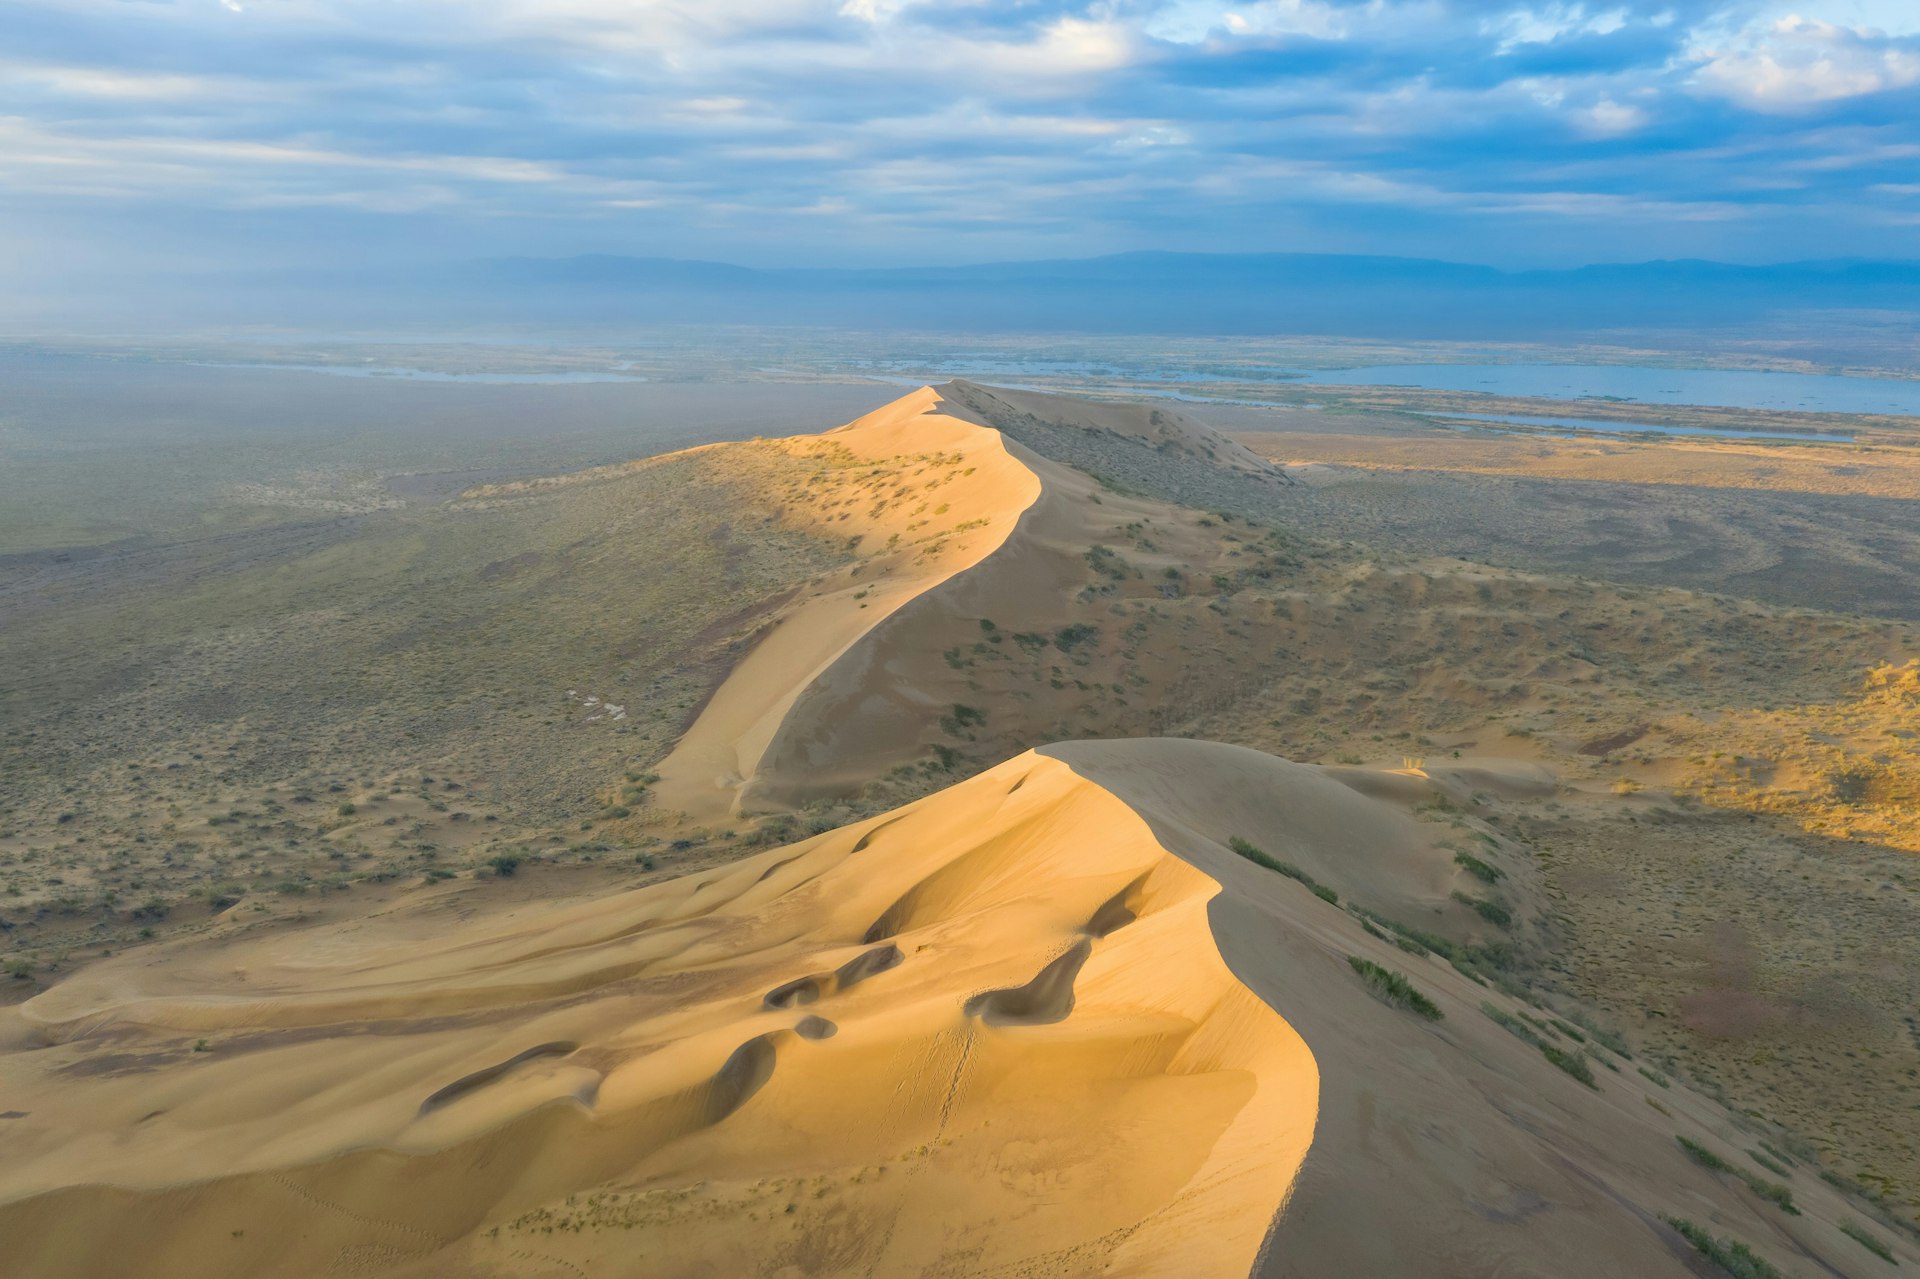 The Singing Sand Dune in Altyn-Emel National Park, Kazakhstan. The large sand dune is surrounded by a desert-like landscape on all sides.